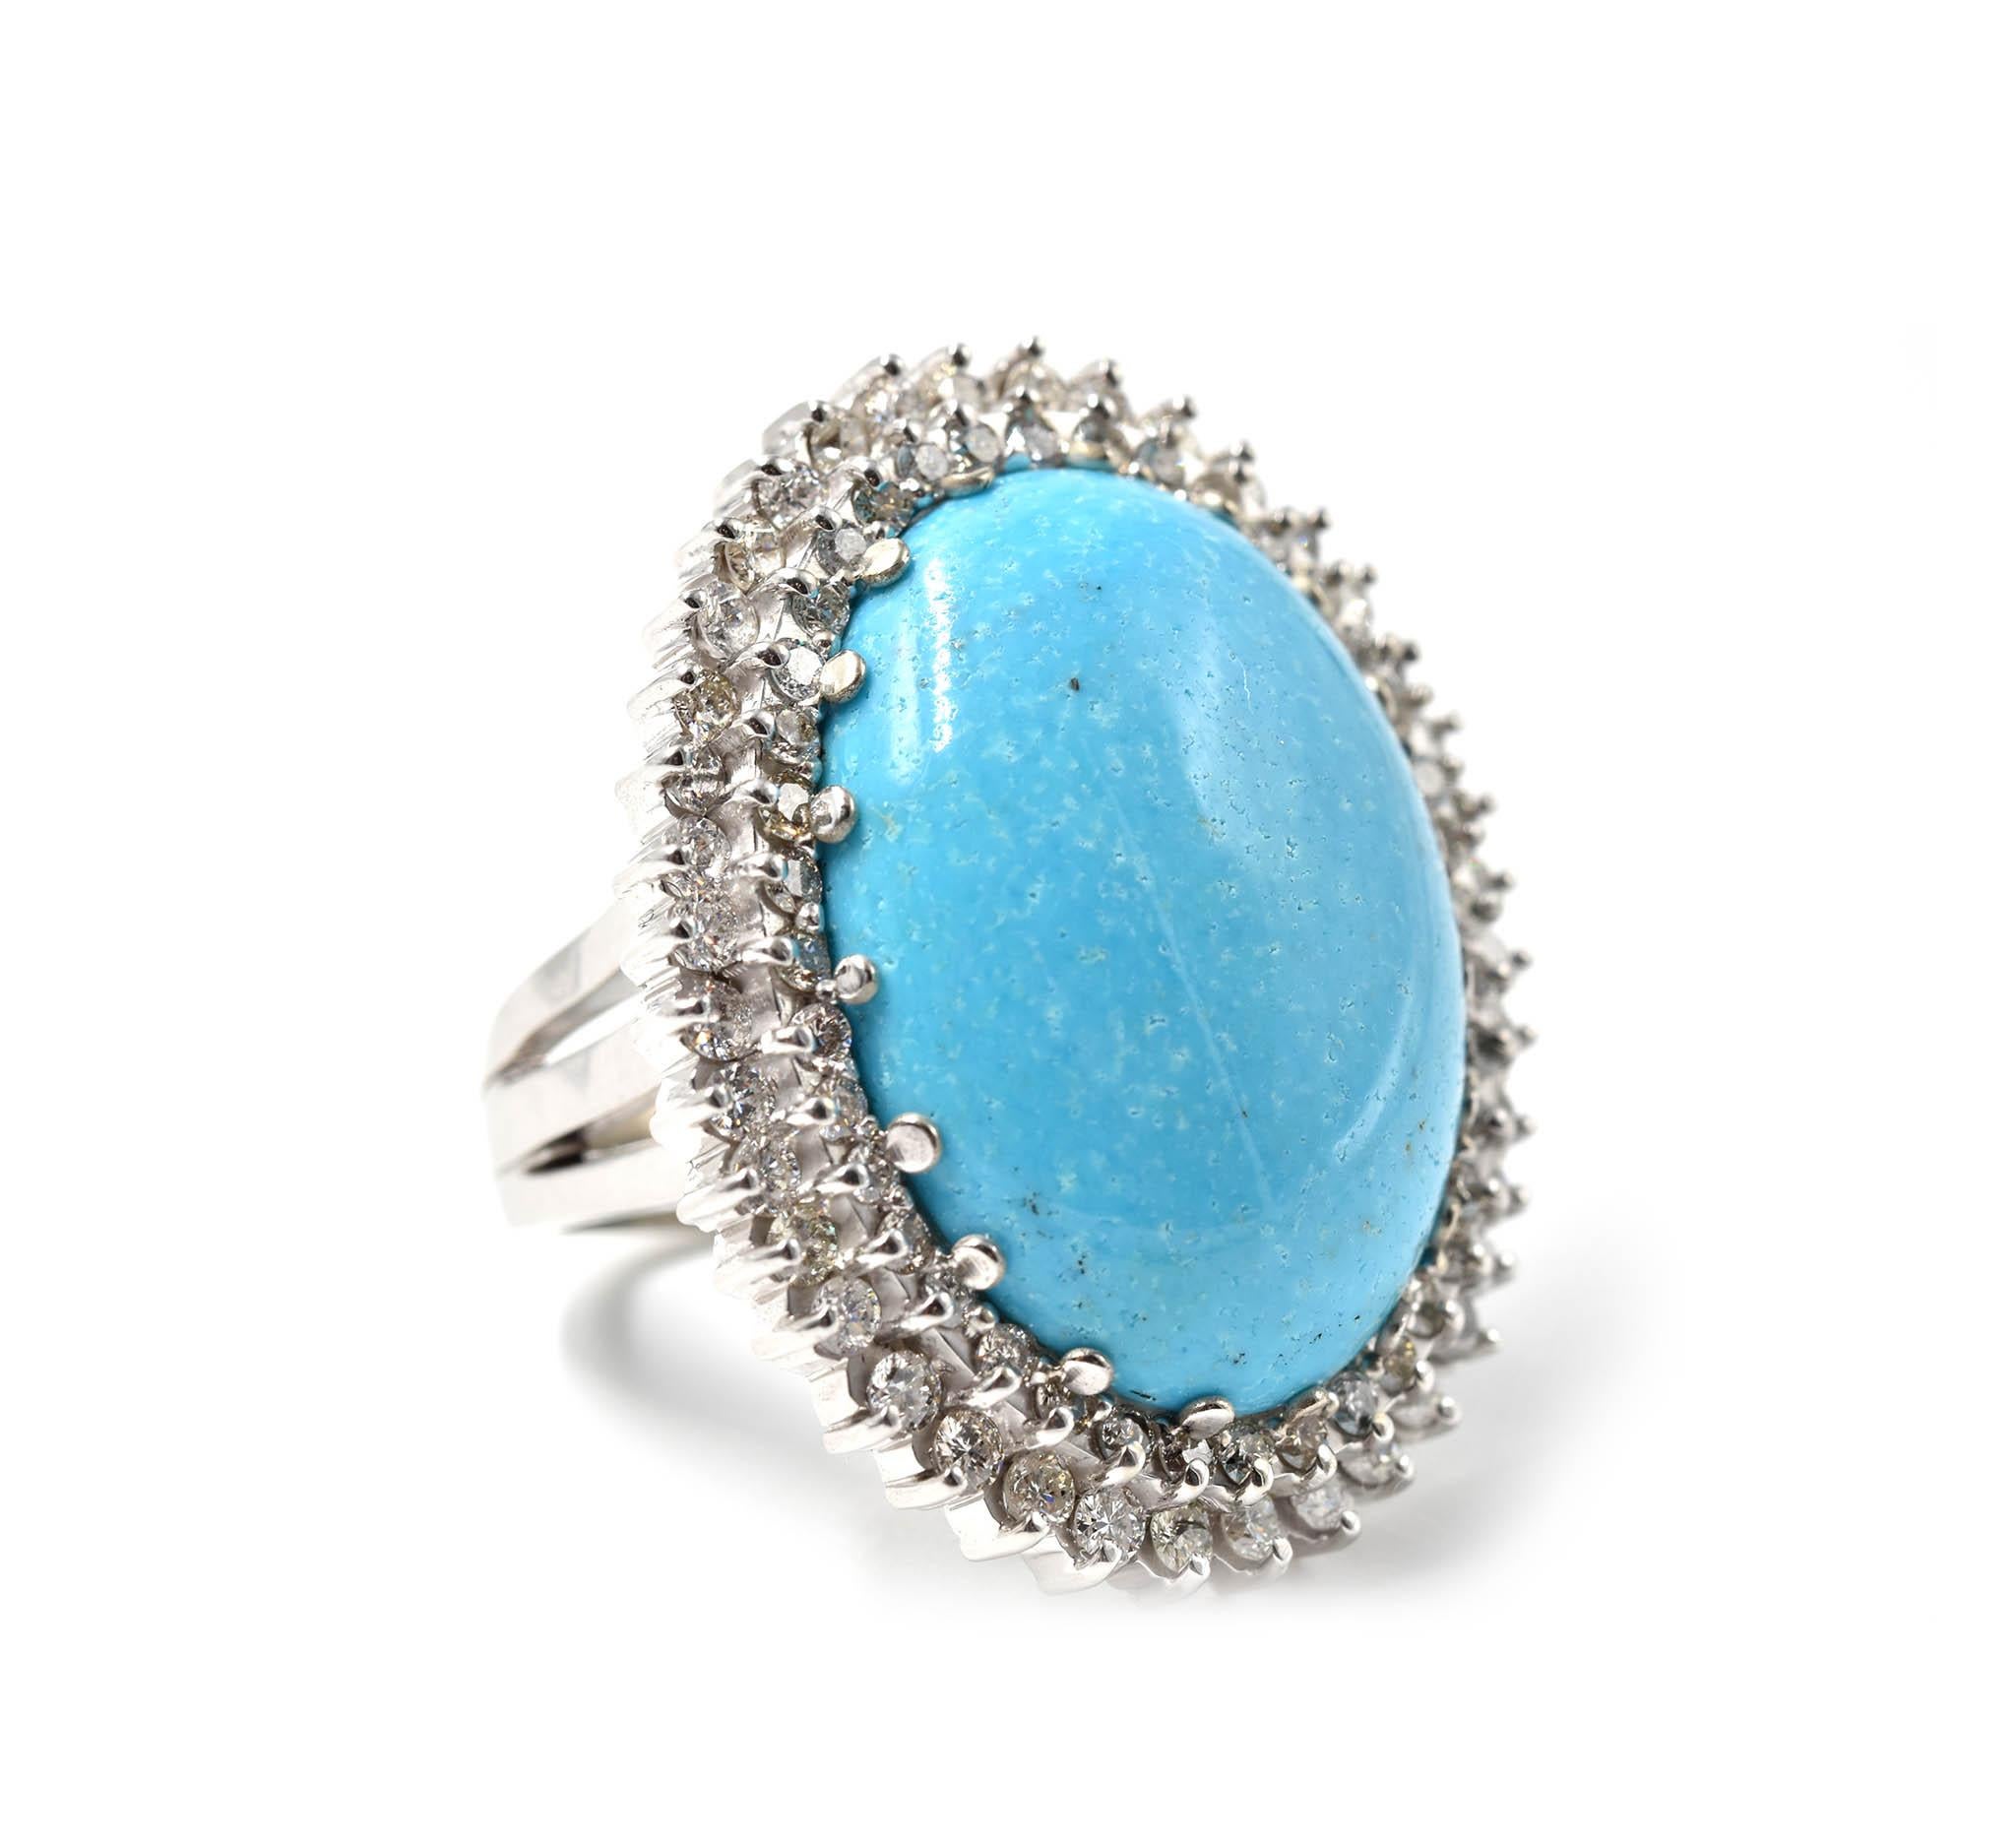 Designer: custom design
Material: 14k white gold
Turquoise: one smooth cabochon cut Nevada turquoise from Blue Gem Mine
Diamonds: 82 round brilliant cuts = 3.21 carat weight
Color: G
Clarity: VS2-SI1
Ring Size: 6 3/4 (please allow two additional